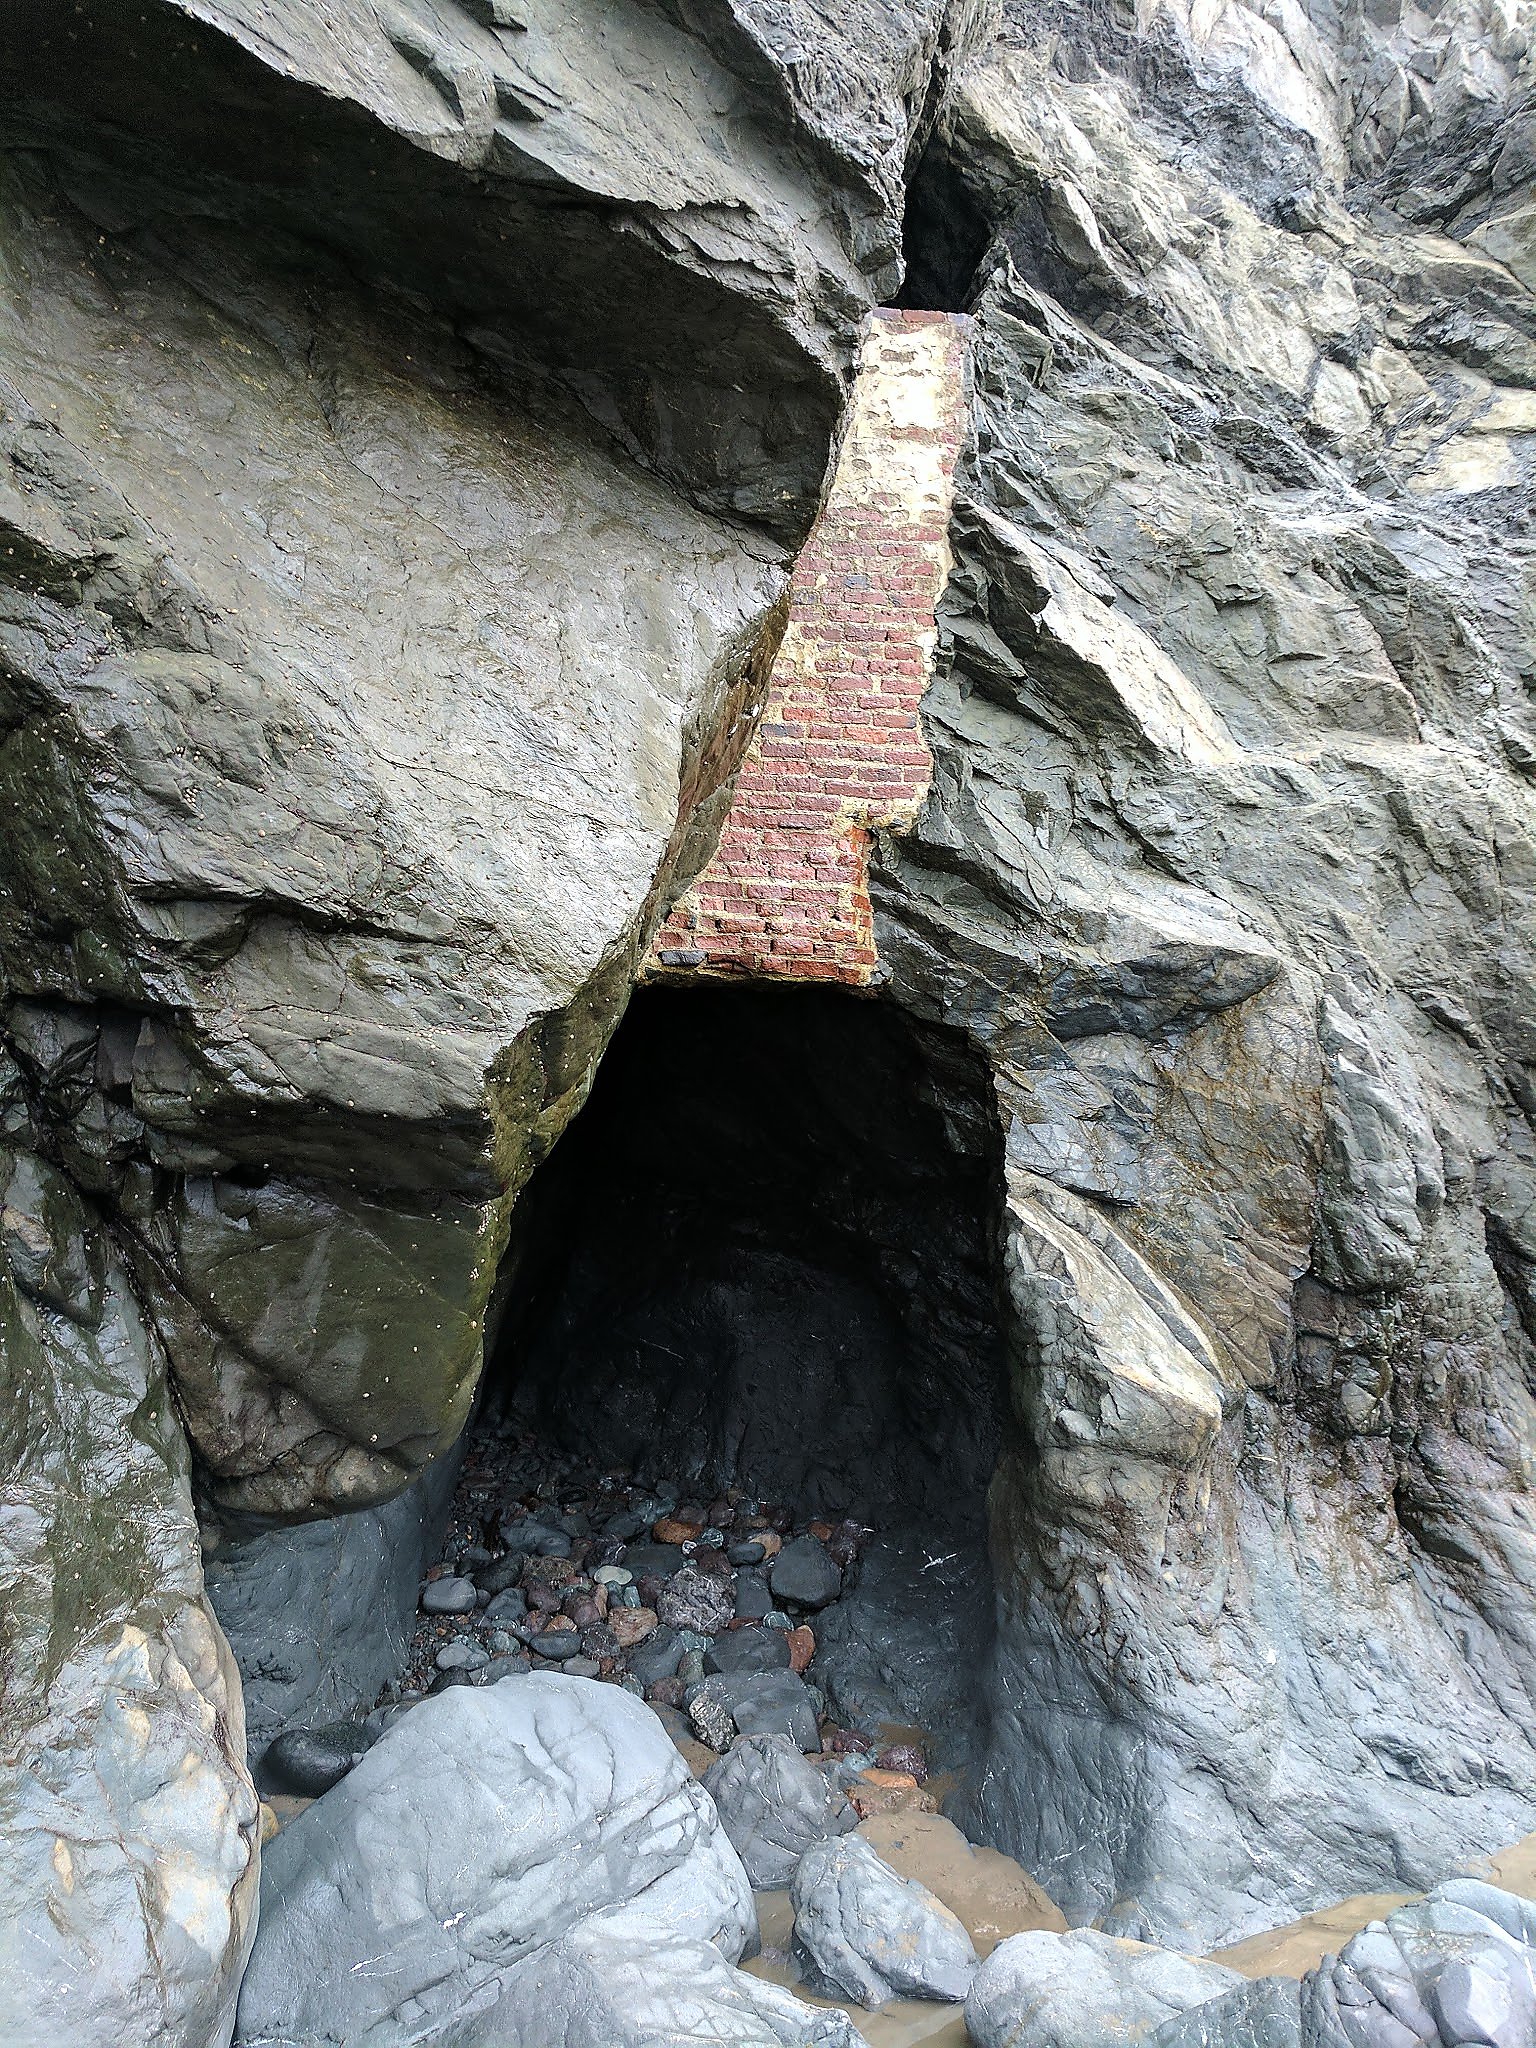 King tides aid exploration of SF's hidden old coal mine - SFGate